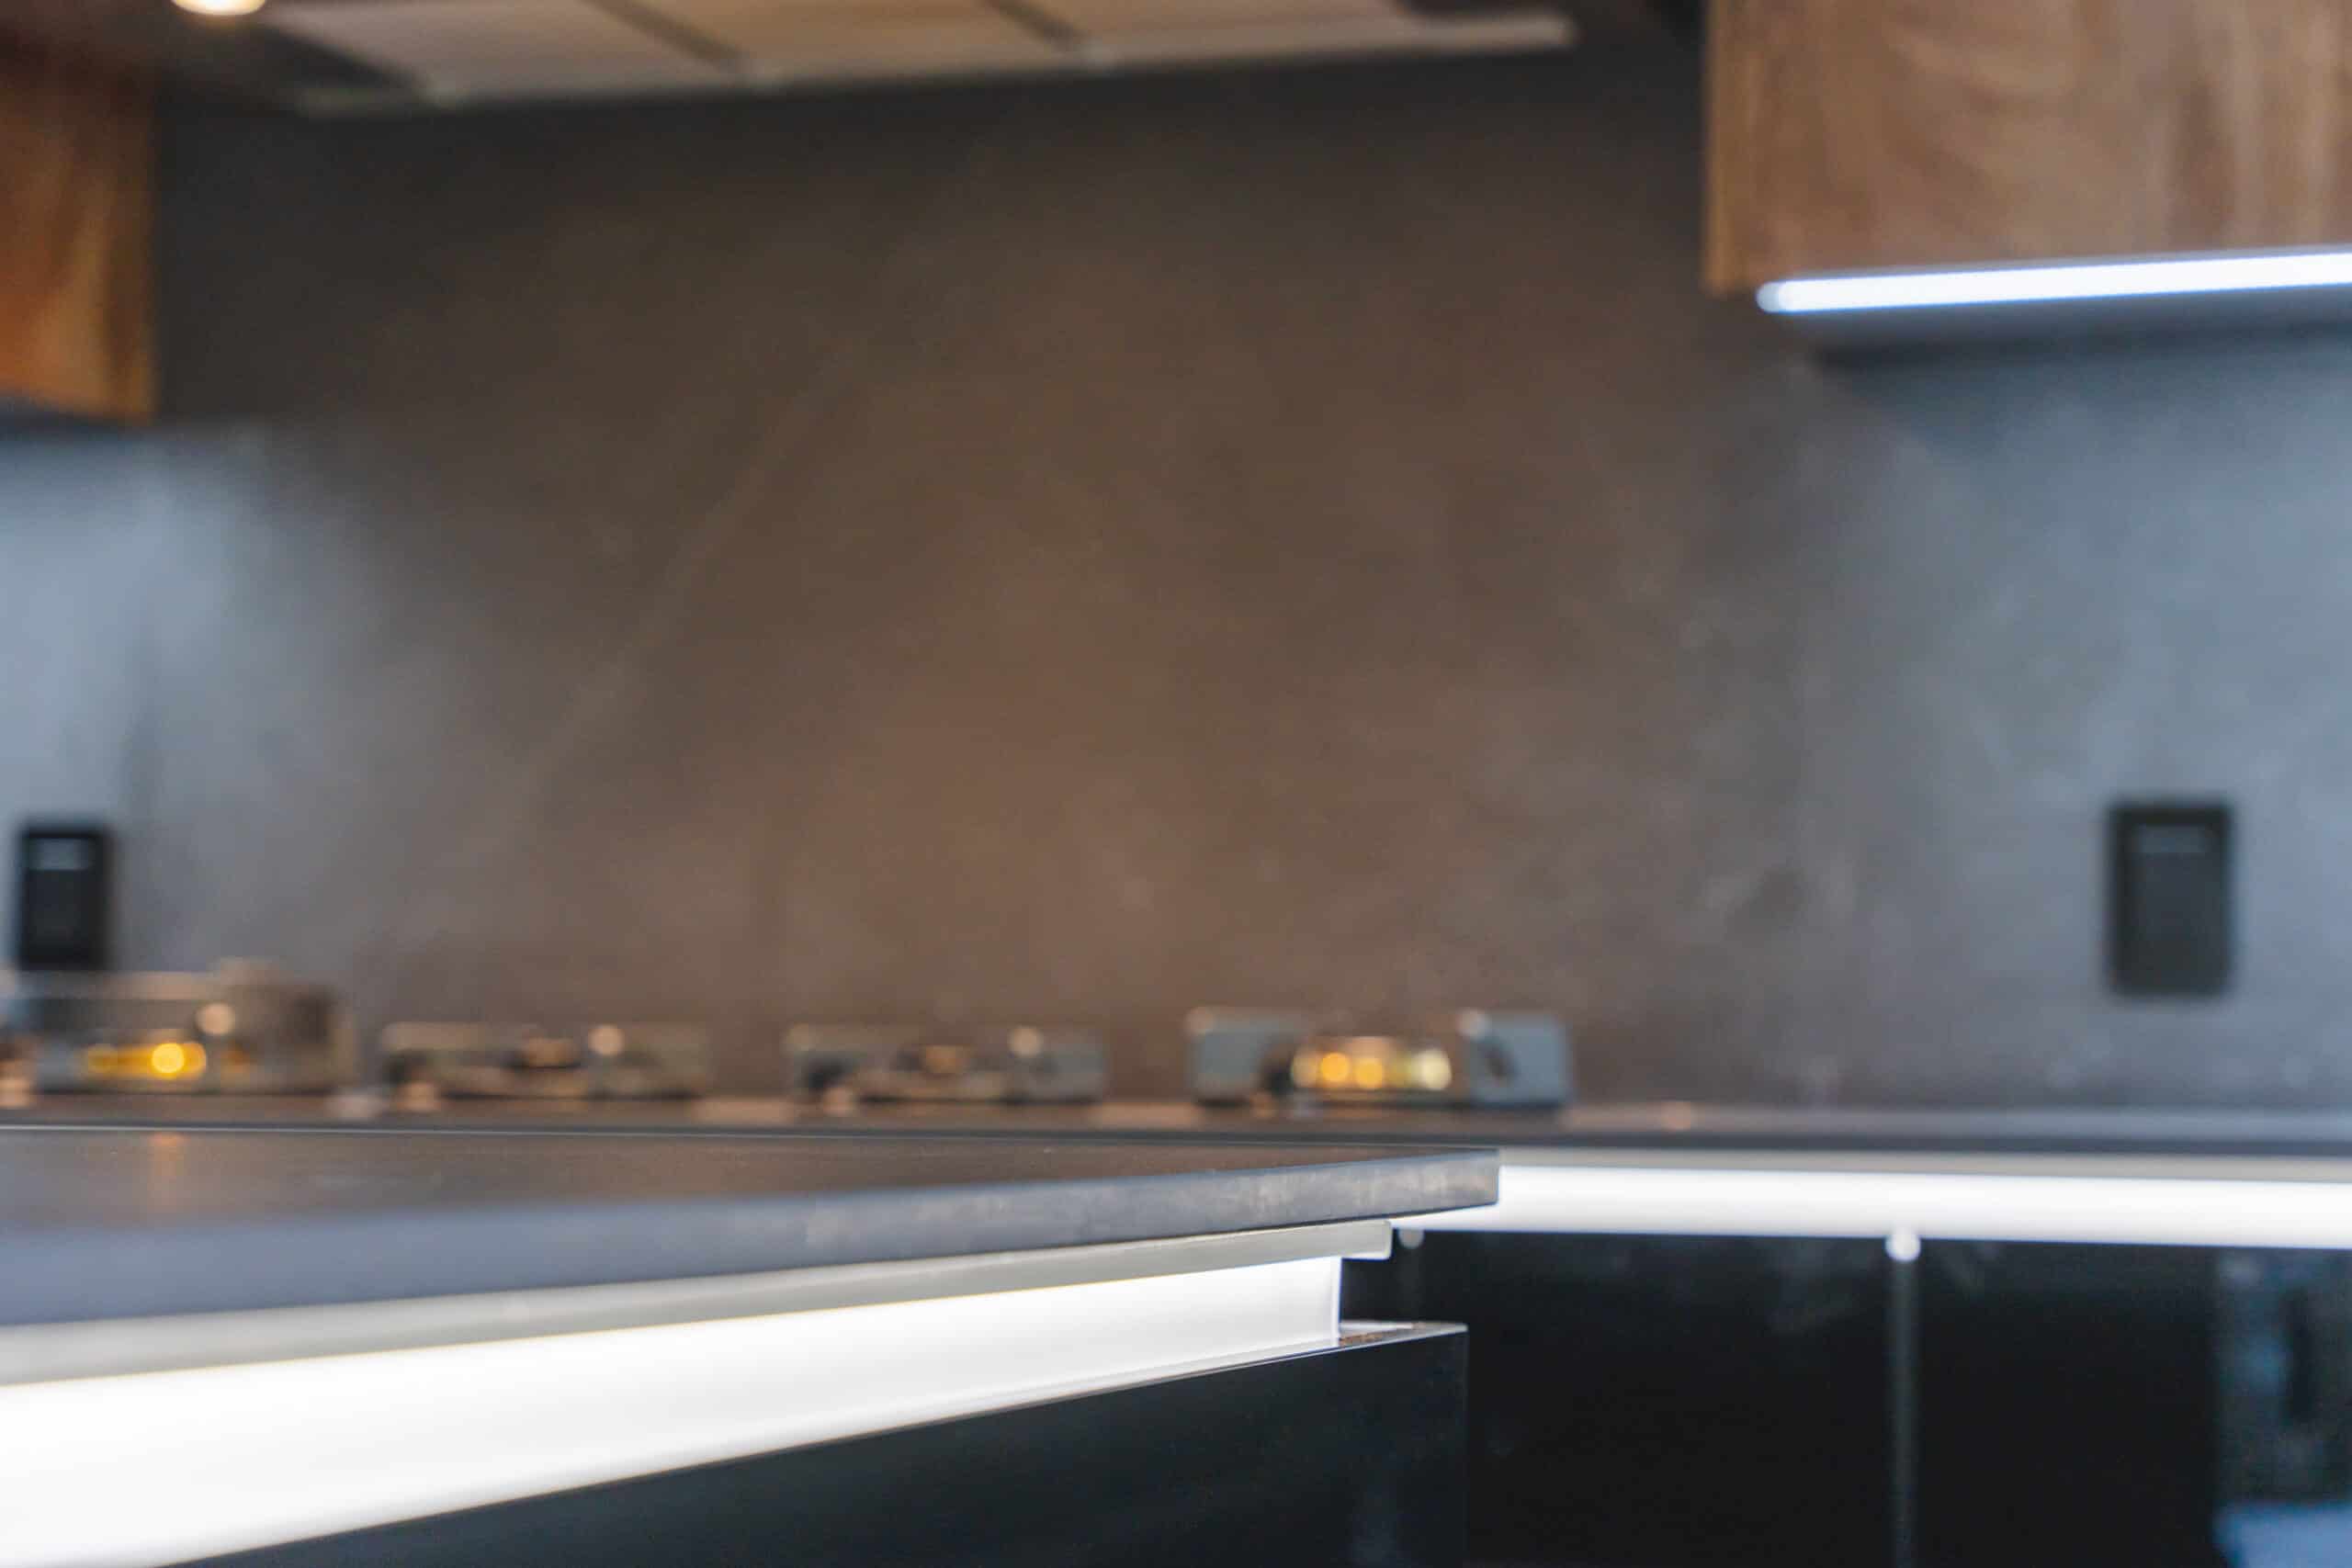 A kitchen with a sleek black counter top and a bright light illuminating the space